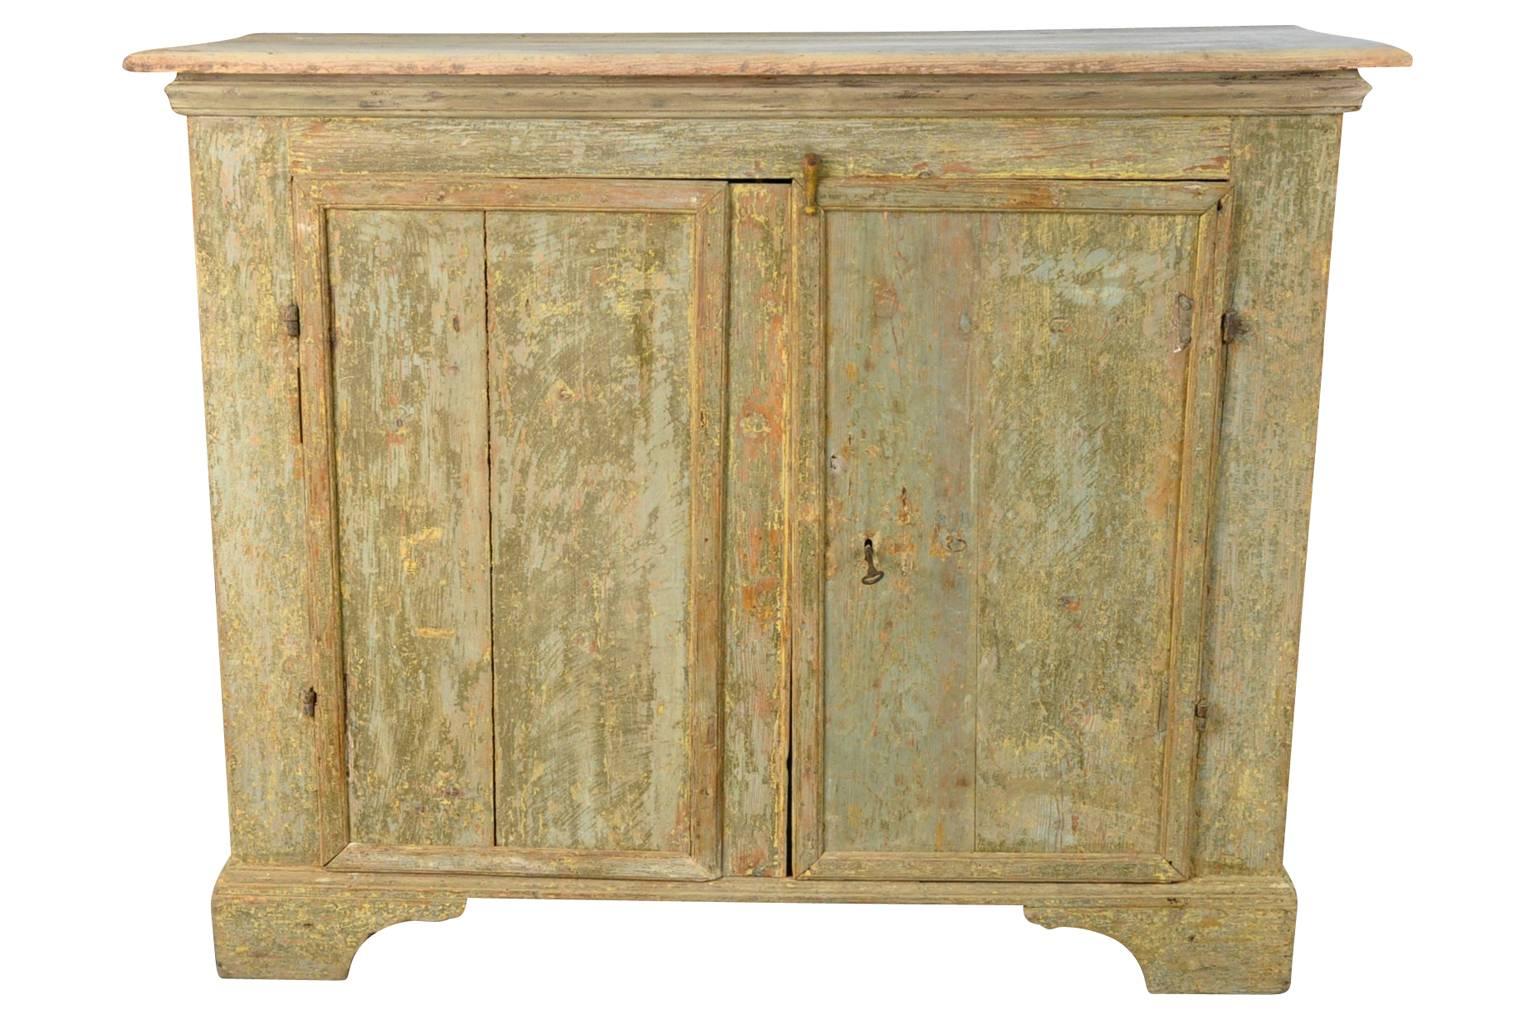 A very charming later 18th century primitive buffet from the Provence region of France. Very soundly constructed with a wonderful and refreshing painted finish.